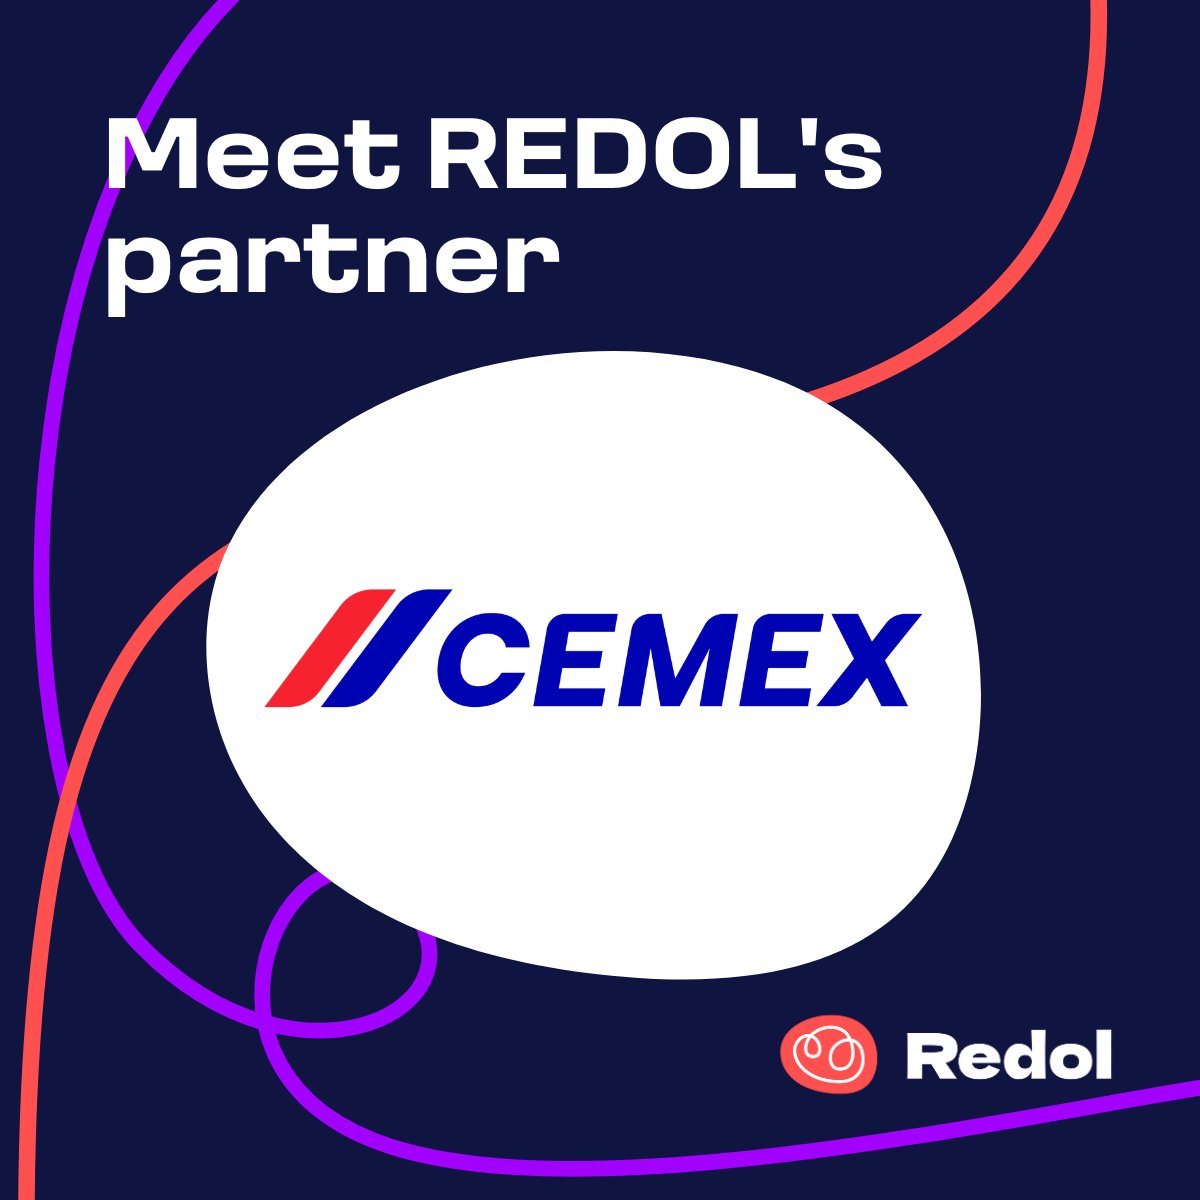 Say hello to @CEMEXEspana ! CEMEX is dedicated to providing innovative & sustainable solutions for construction. 

🔄 In #REDOL, they're on a mission to explore the energetic & material valorization of waste streams through cutting-edge technologies.